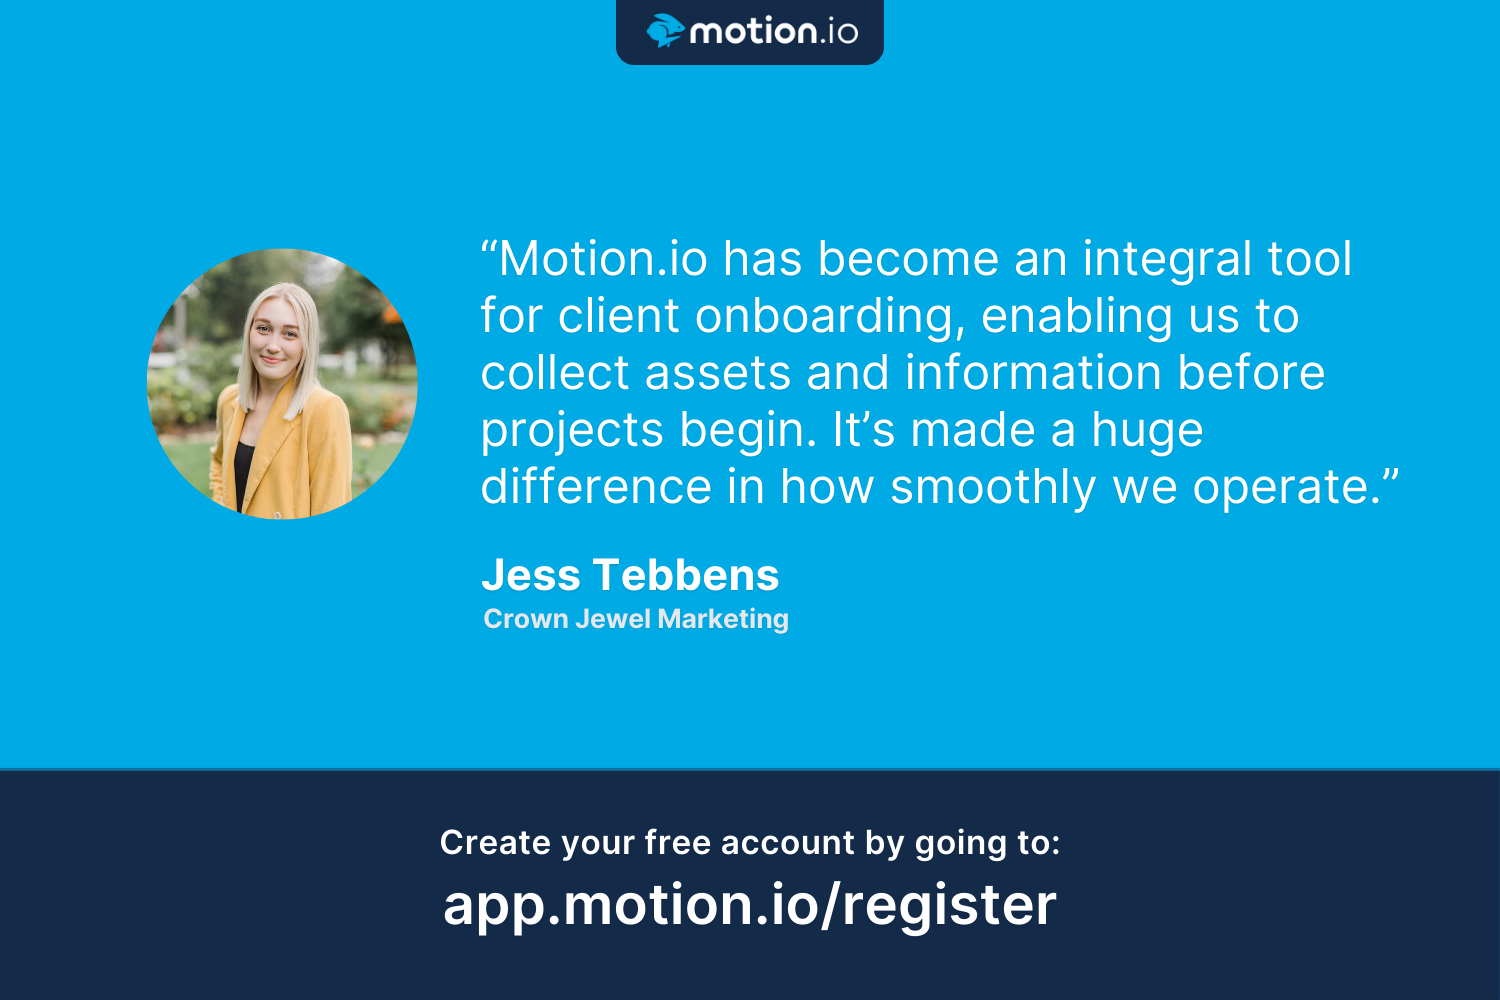 Learn the platform in less than an hour. Start elevating your client experience in less than a day. Try Motion.io for free today. 